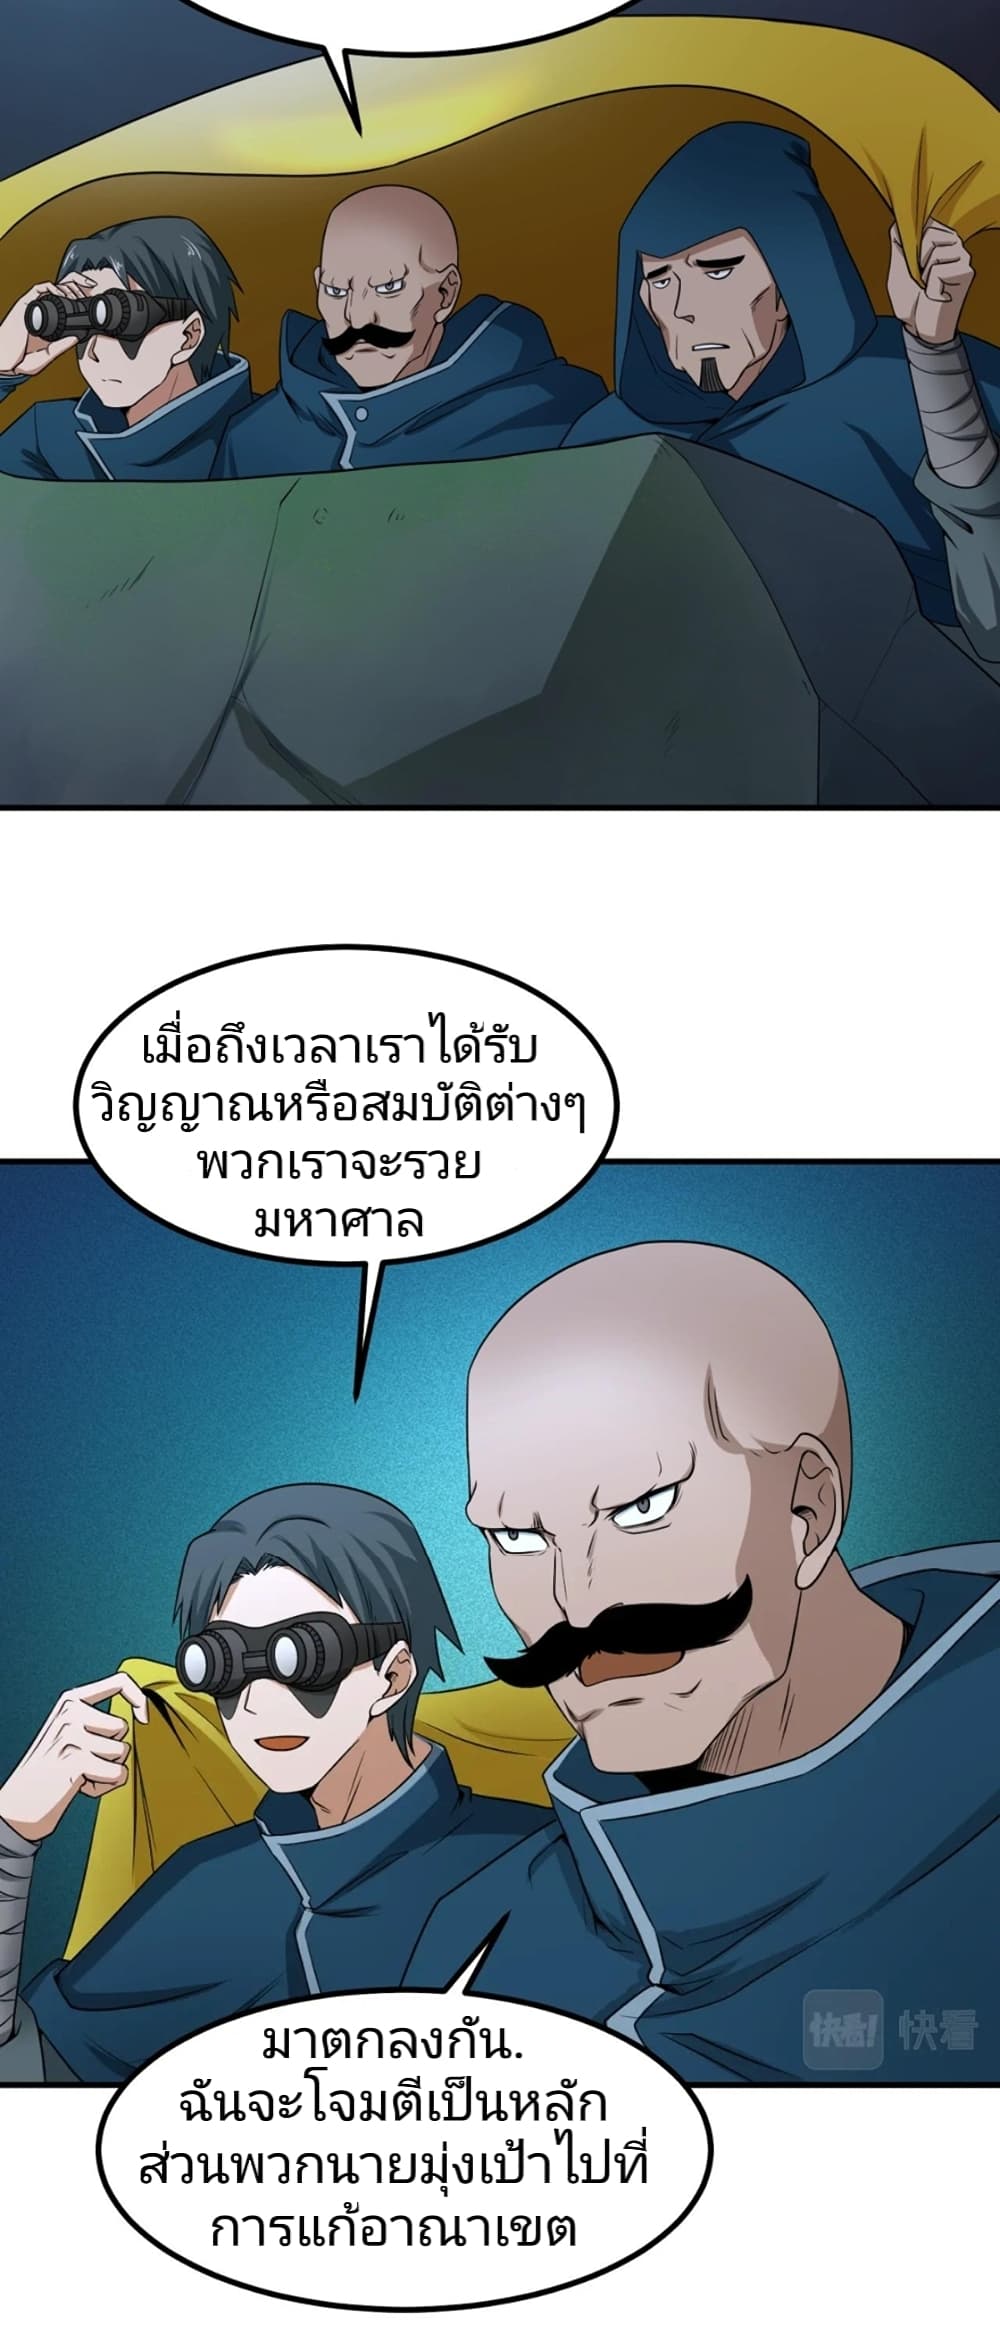 The Age of Ghost Spirits à¸à¸­à¸à¸à¸µà¹ 8 (3)